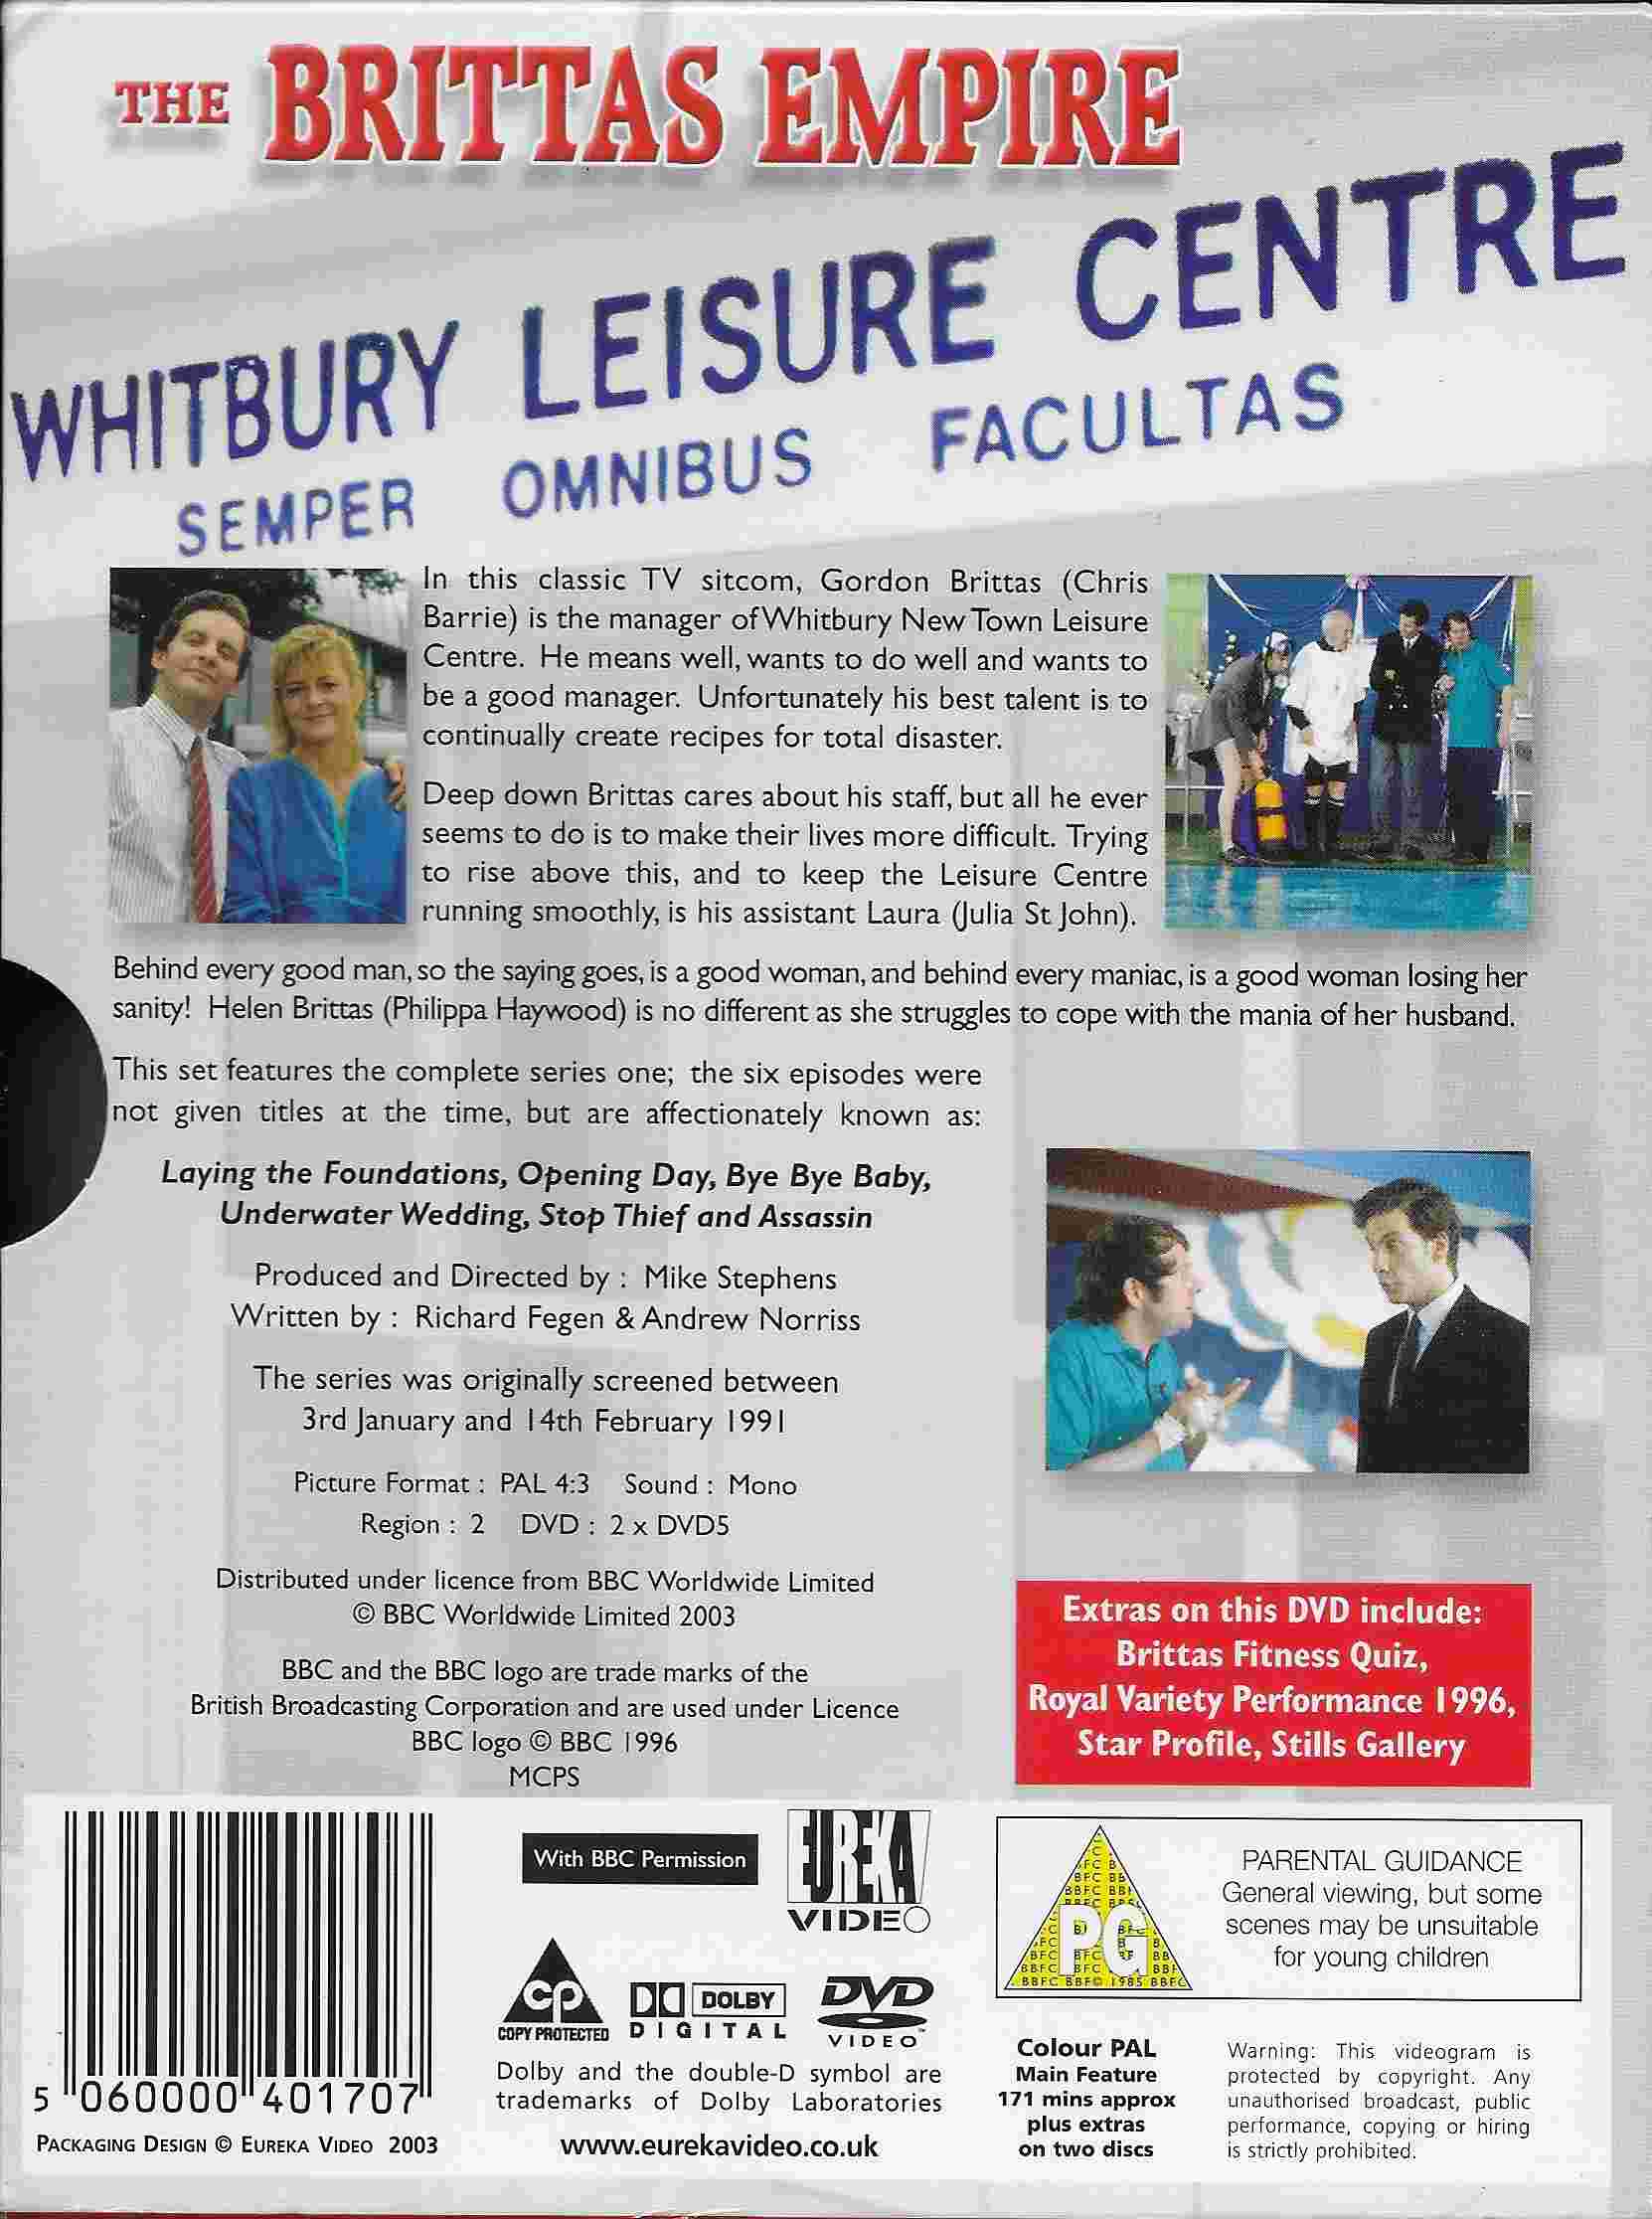 Picture of EKA 50011 The Brittas empire - Series 1 by artist Richard Fegen / Andrew Norriss from the BBC records and Tapes library